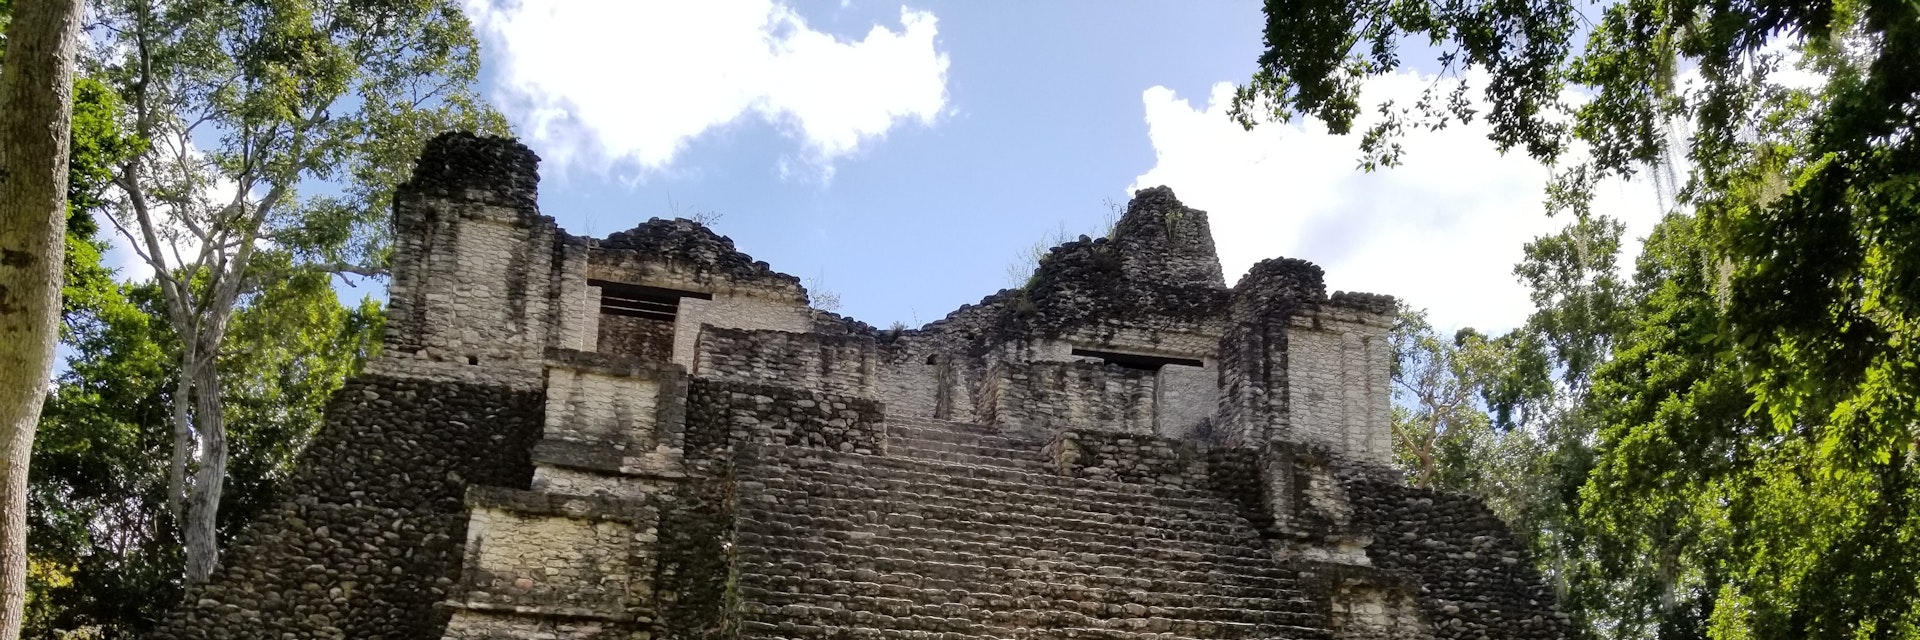 This is one of the well preserved ancient Mayan temples at the Dzibanche's archeological Mayan ruins site about two hours inland in the Yucatan region of Mexico. They still allow visitors to climb to the top of the temples but may need to restrict it in the future due to the expansion of tourism in the area.
Dzibanche